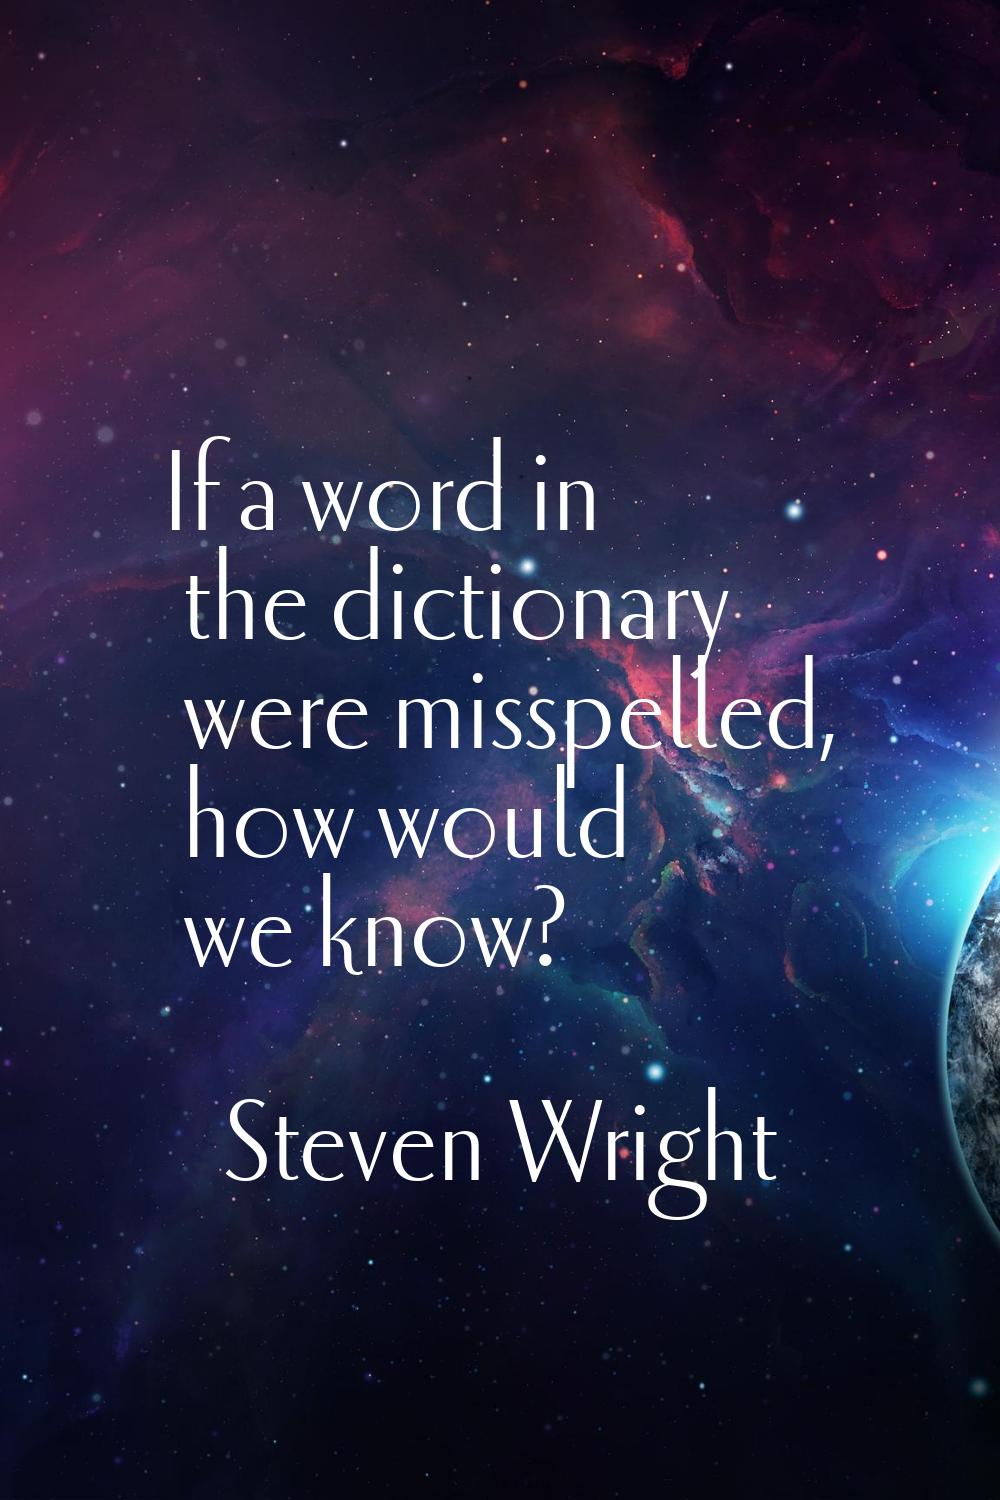 If a word in the dictionary were misspelled, how would we know?